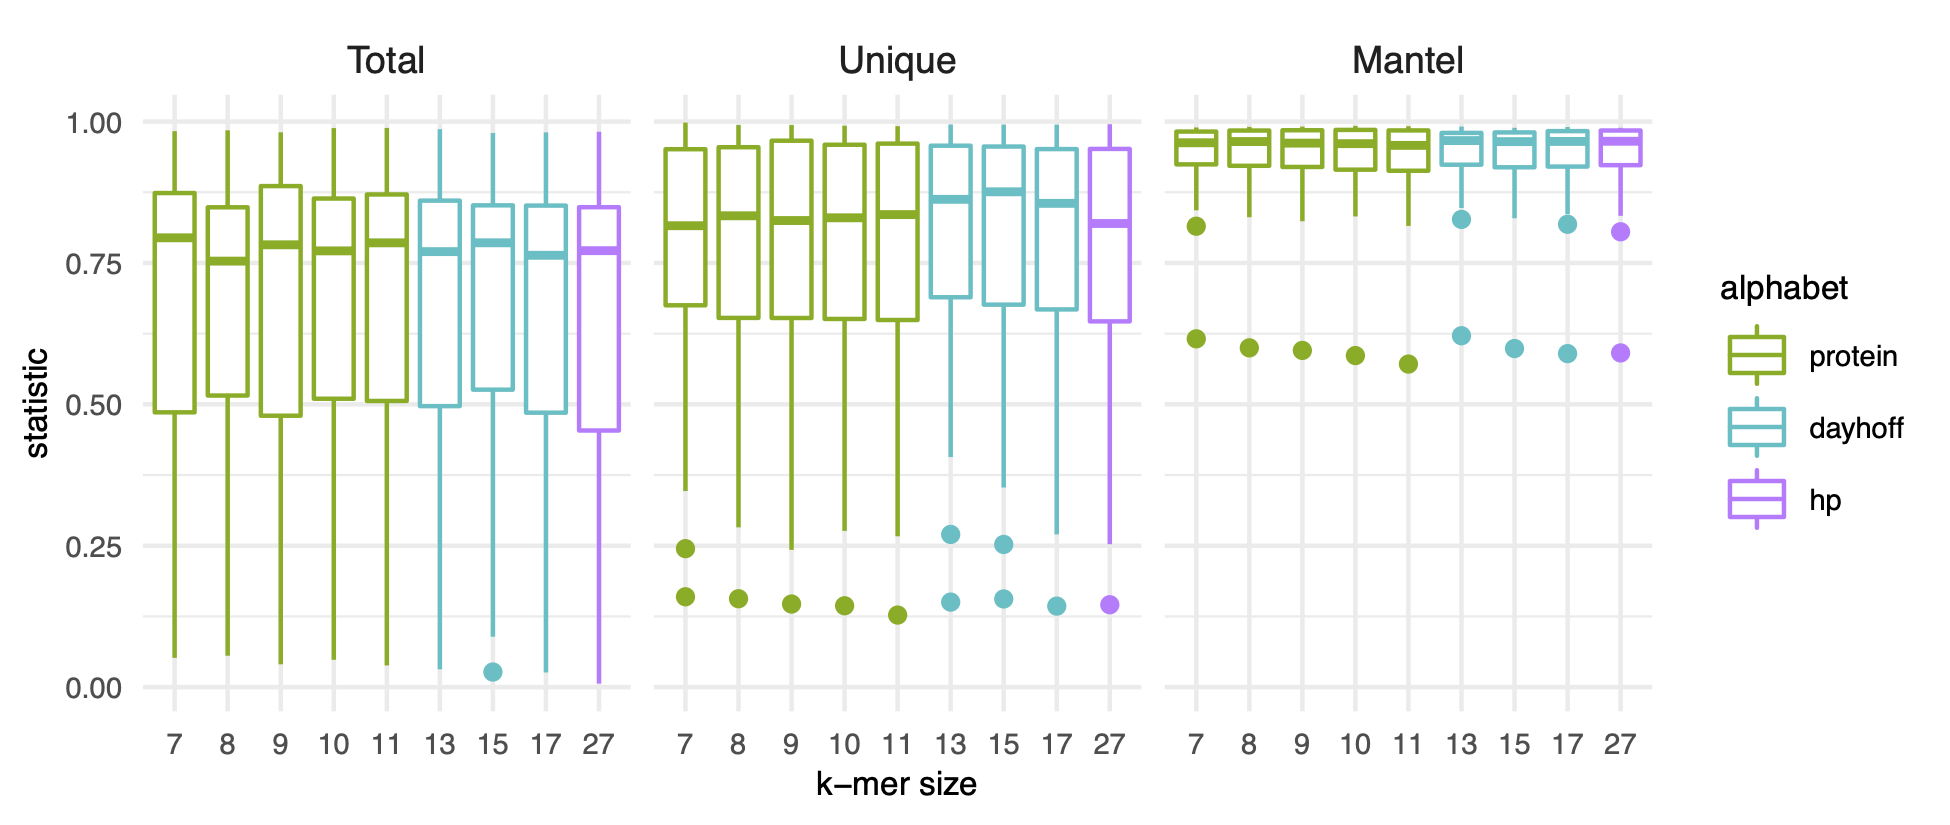 Figure S2: K-mer size and encoding do not impact pangenome estimation with k-mers. Box plots representing the distribution of R2 values for linear models (Total, Unique) or statistic values for mantel tests (Mantel) calculated for each pangenome. All pangenomes are included, whether they contain genomes with the RefSeq exclusion criteria “many frameshifted proteins” or not. See figure legend for Figure 2 for a description of Total, Unique, and Mantel.